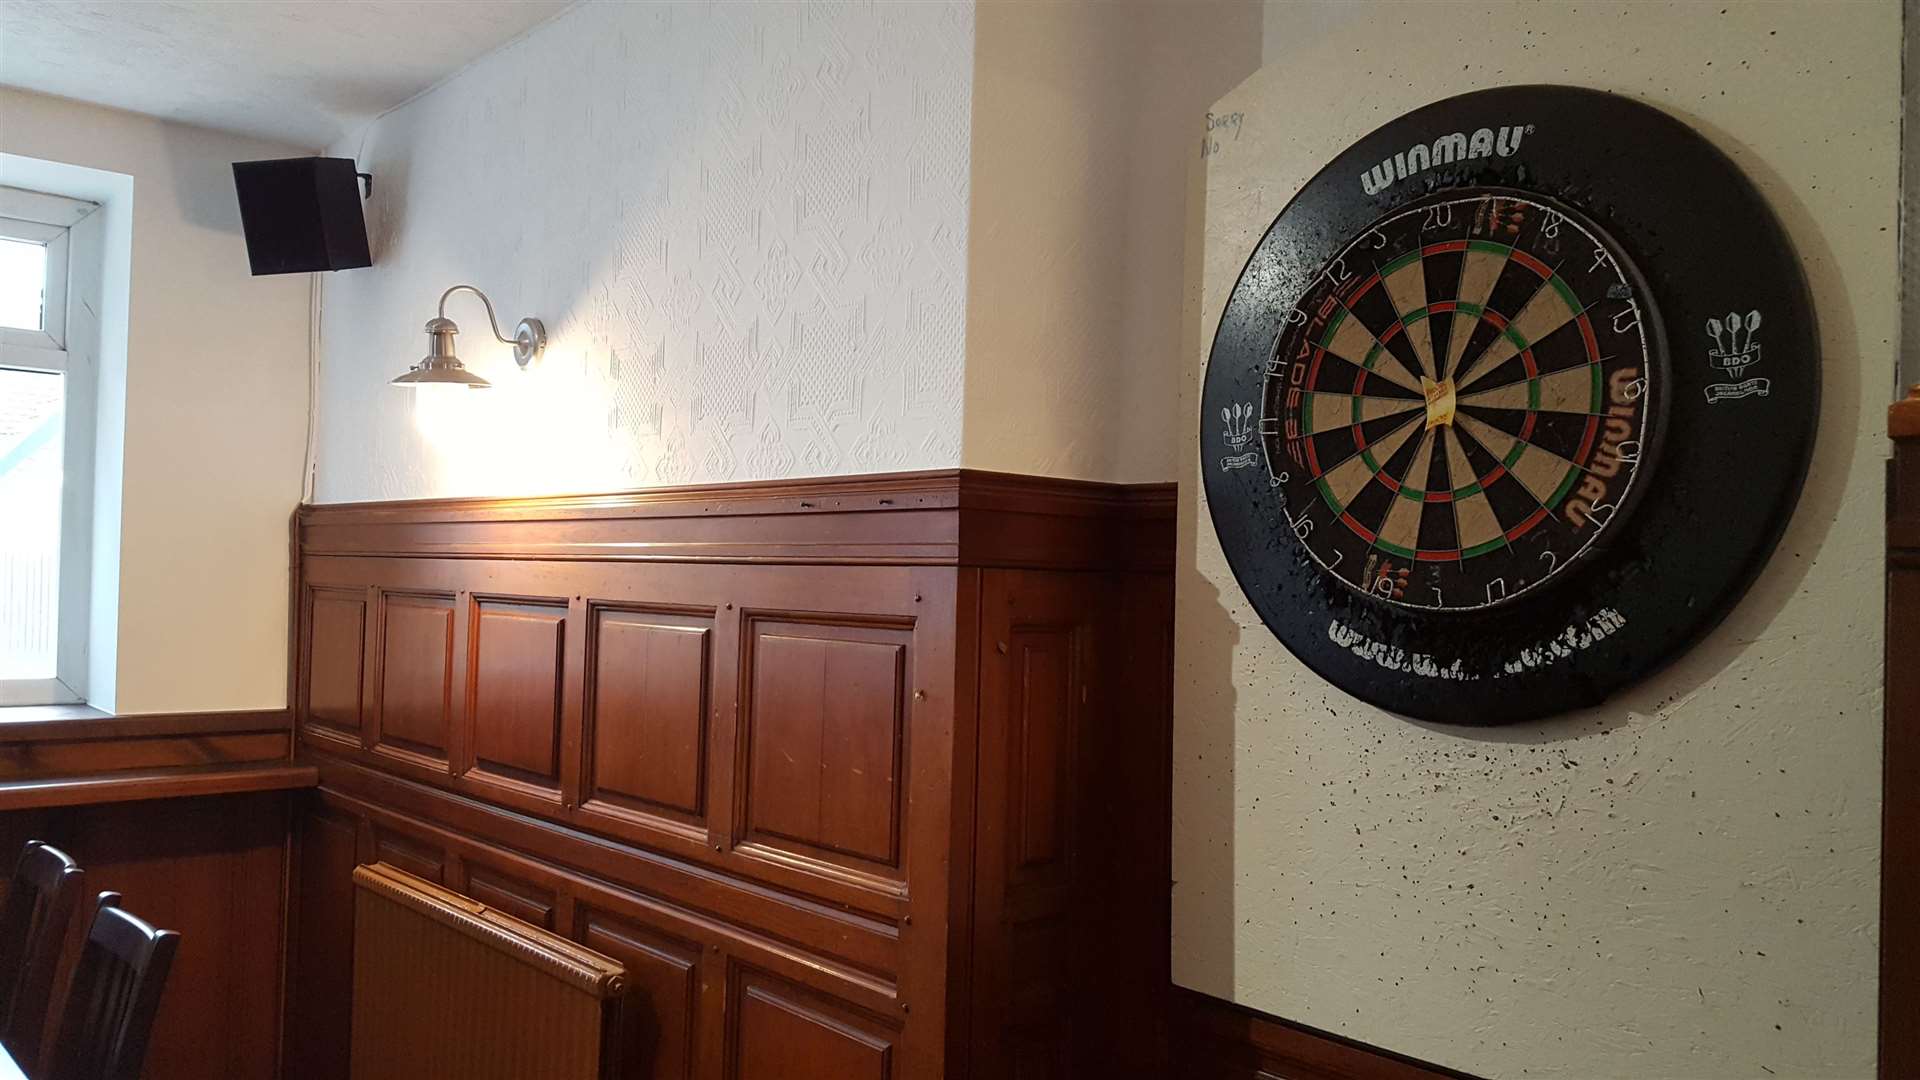 The "traditional" pub has a darts board and a jukebox